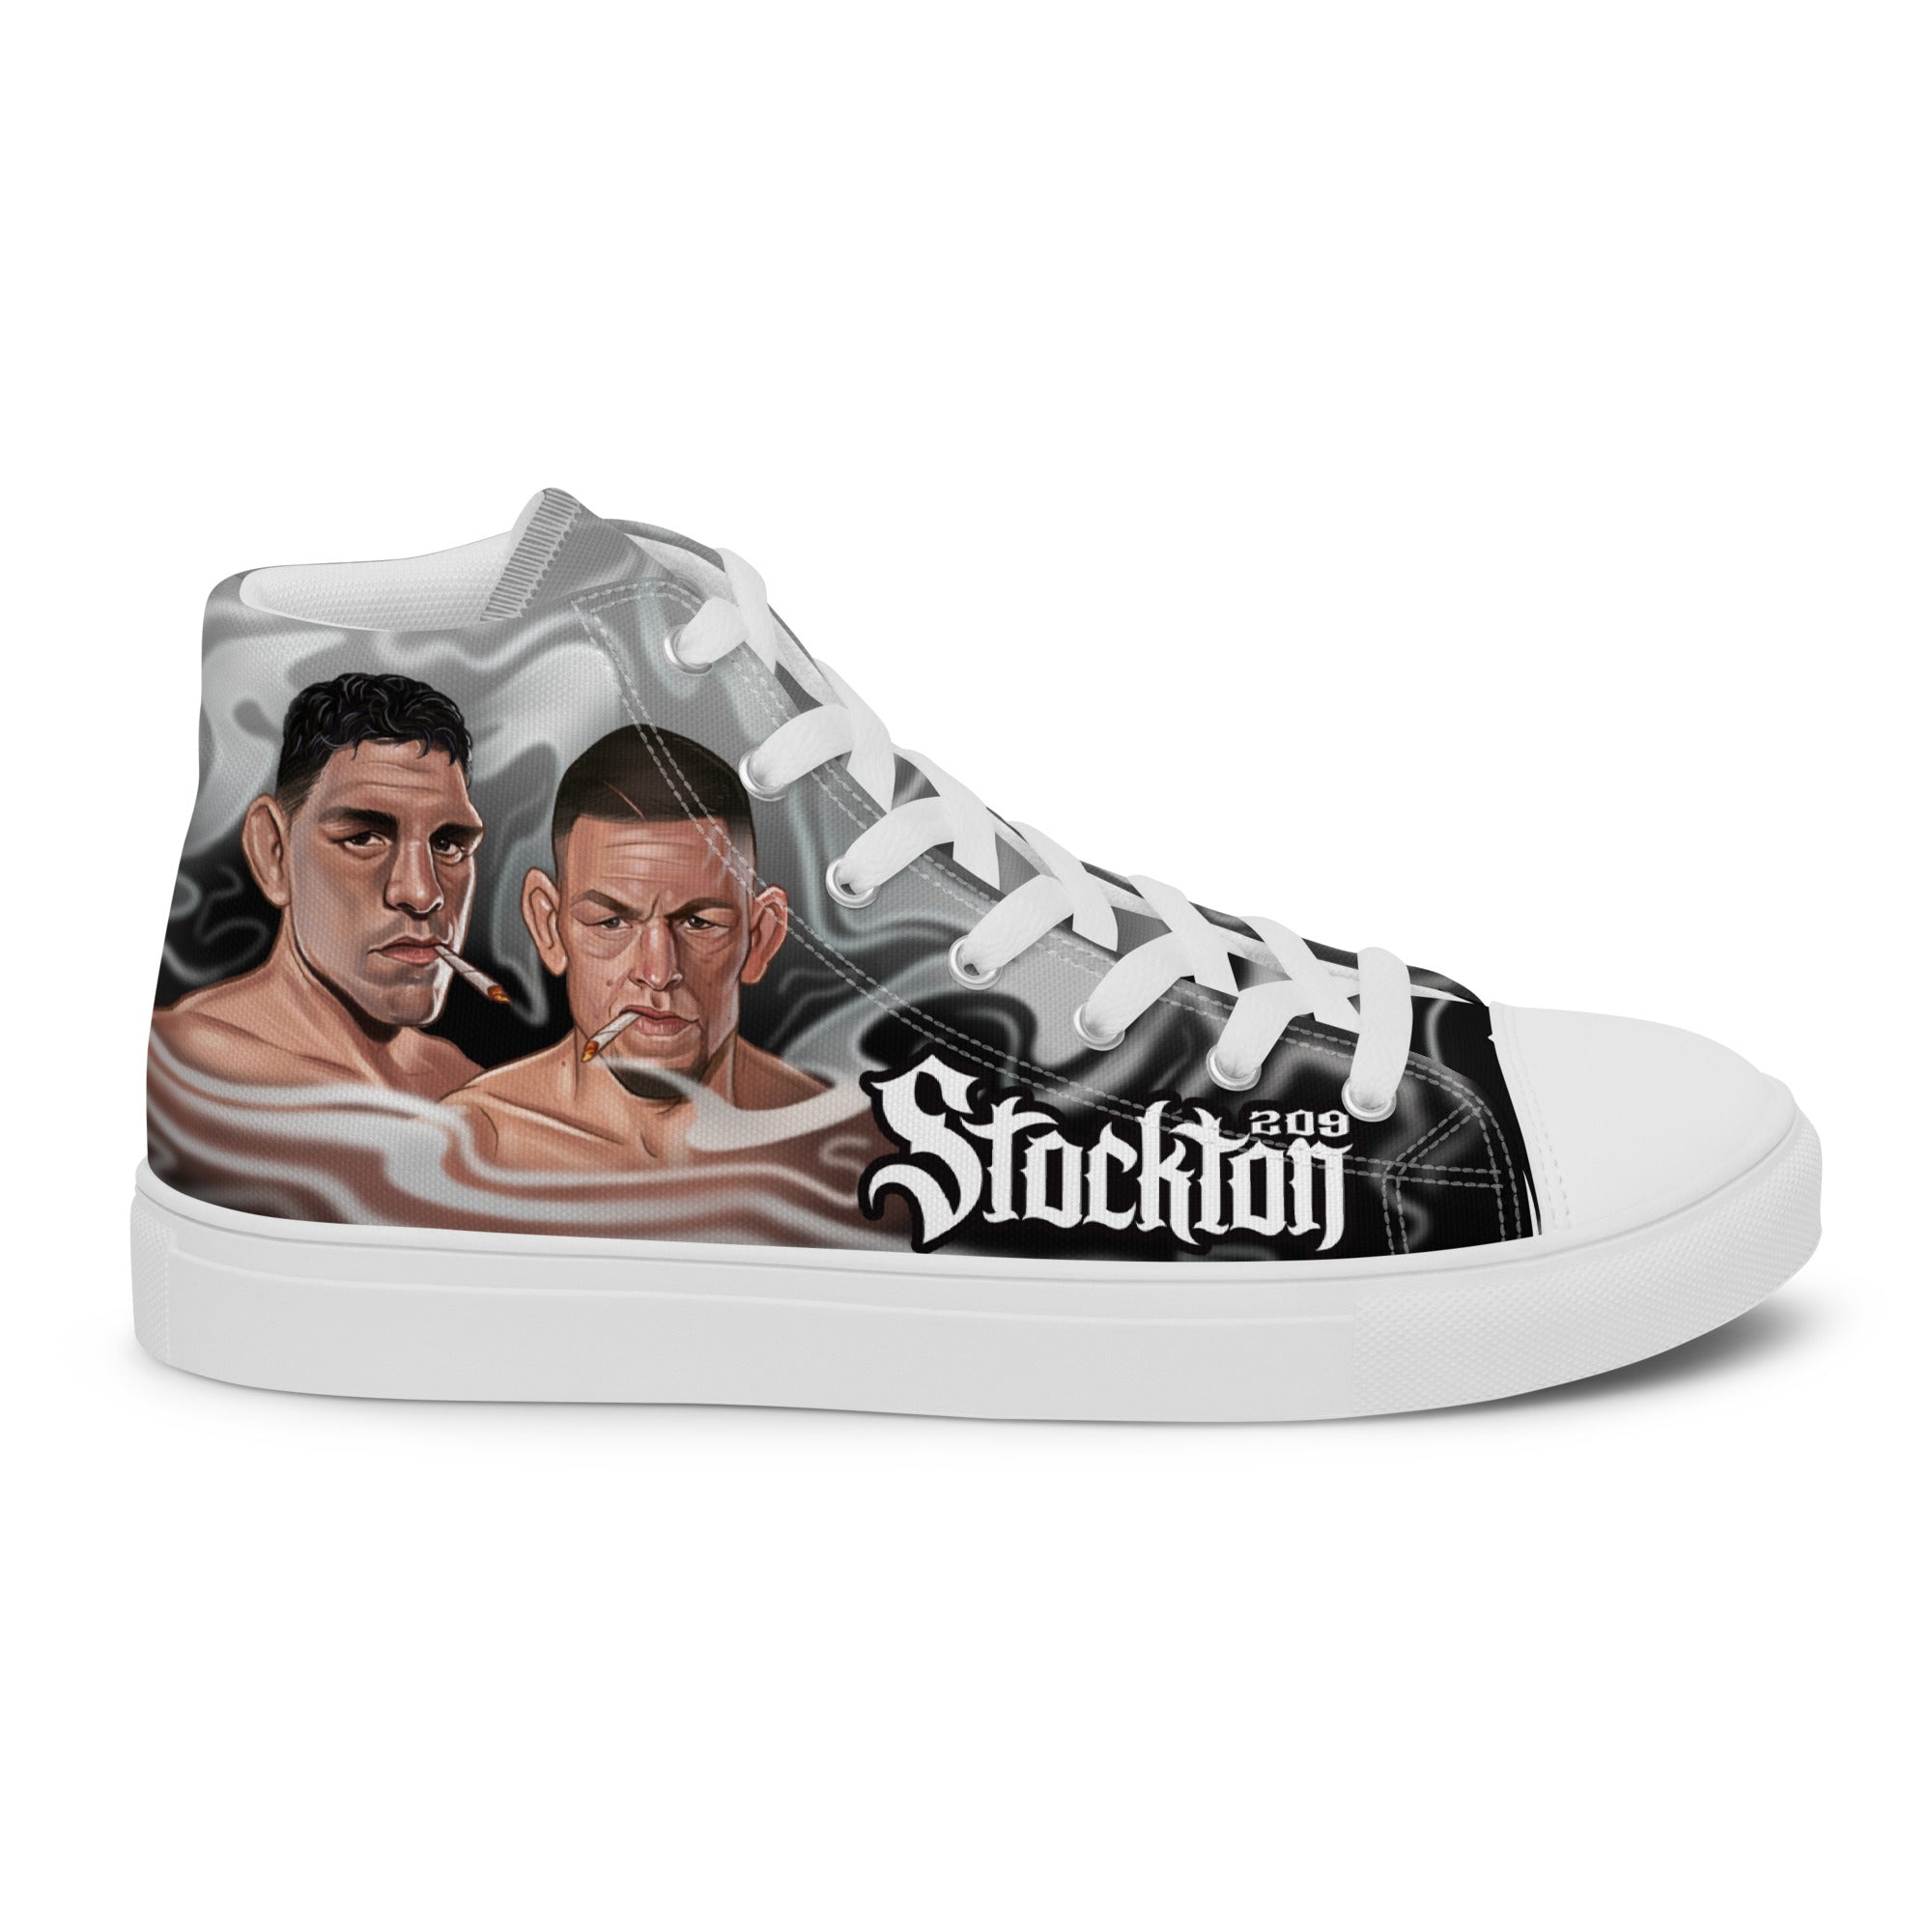 Stockton 209 - Diaz Brothers Inspired Shoe Shoes